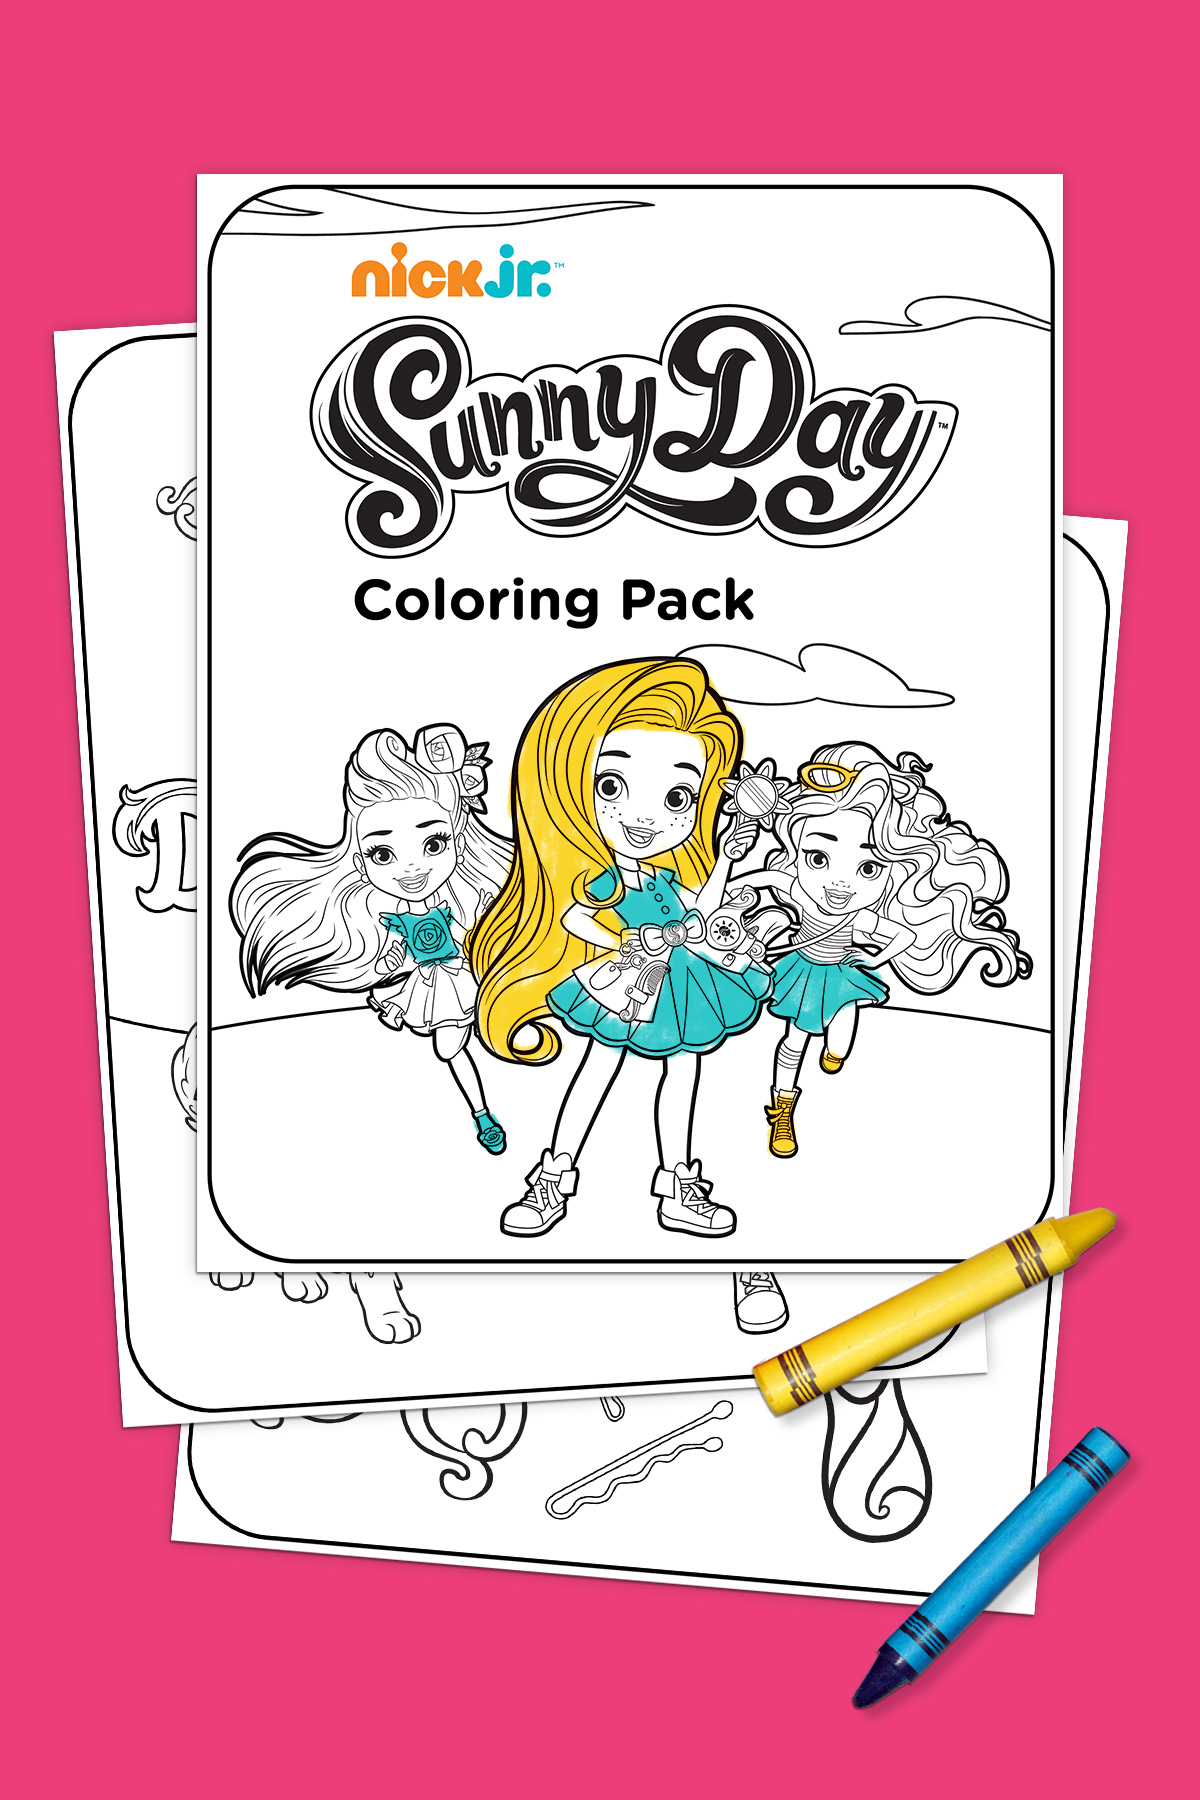 Sunny Day Coloring Pack Nickelodeon Parents Valentine coloring pages and activity sheets your kids will love! sunny day coloring pack nickelodeon